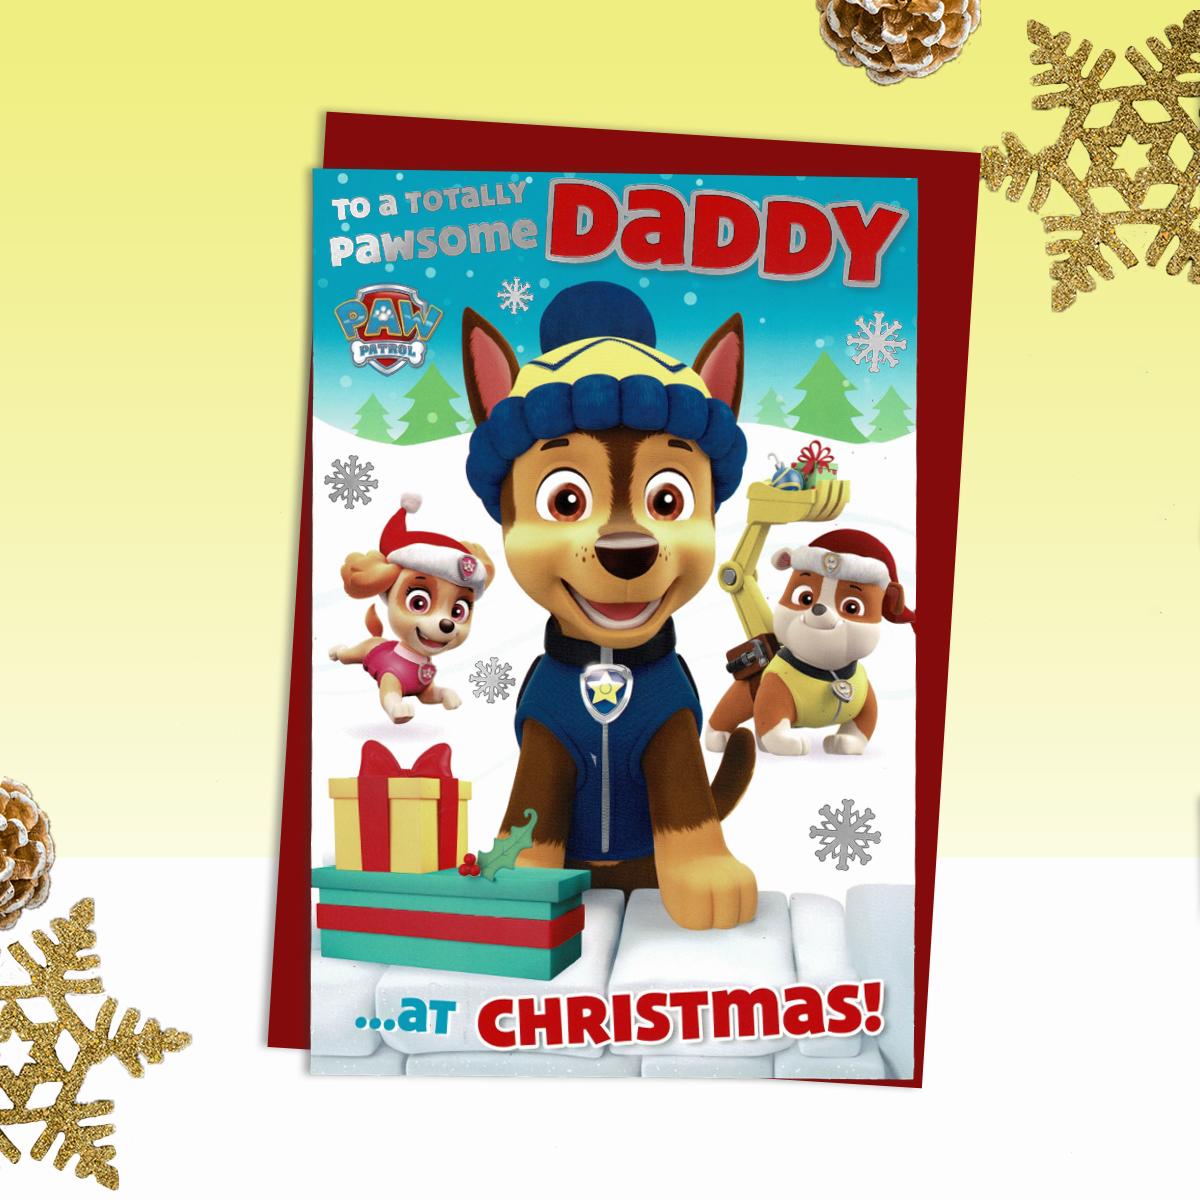 Daddy Paw Patrol Greeting Card Alongside Its Red Envelope